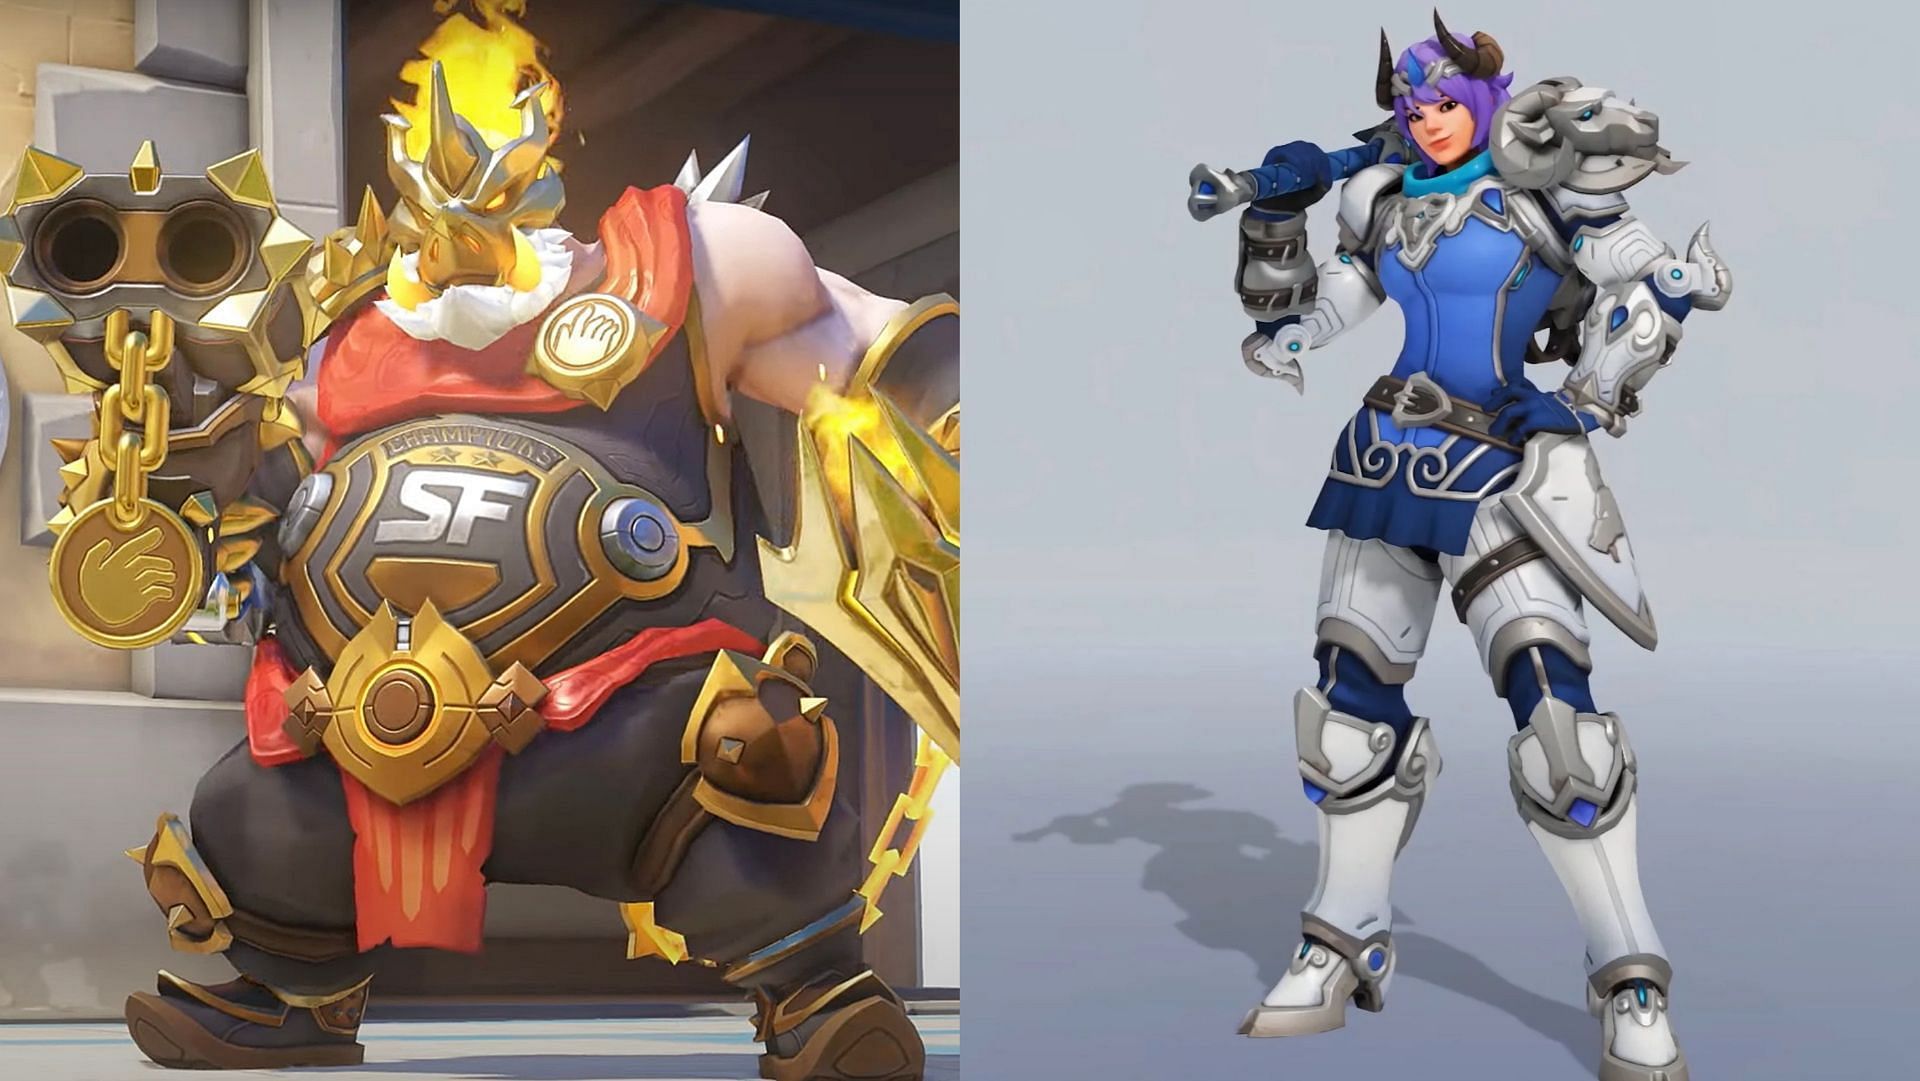 Midas Roadhog and GOAT Brigitte skins included in the Overwatch 2 League shop (Images via Blizzard Entertainment)